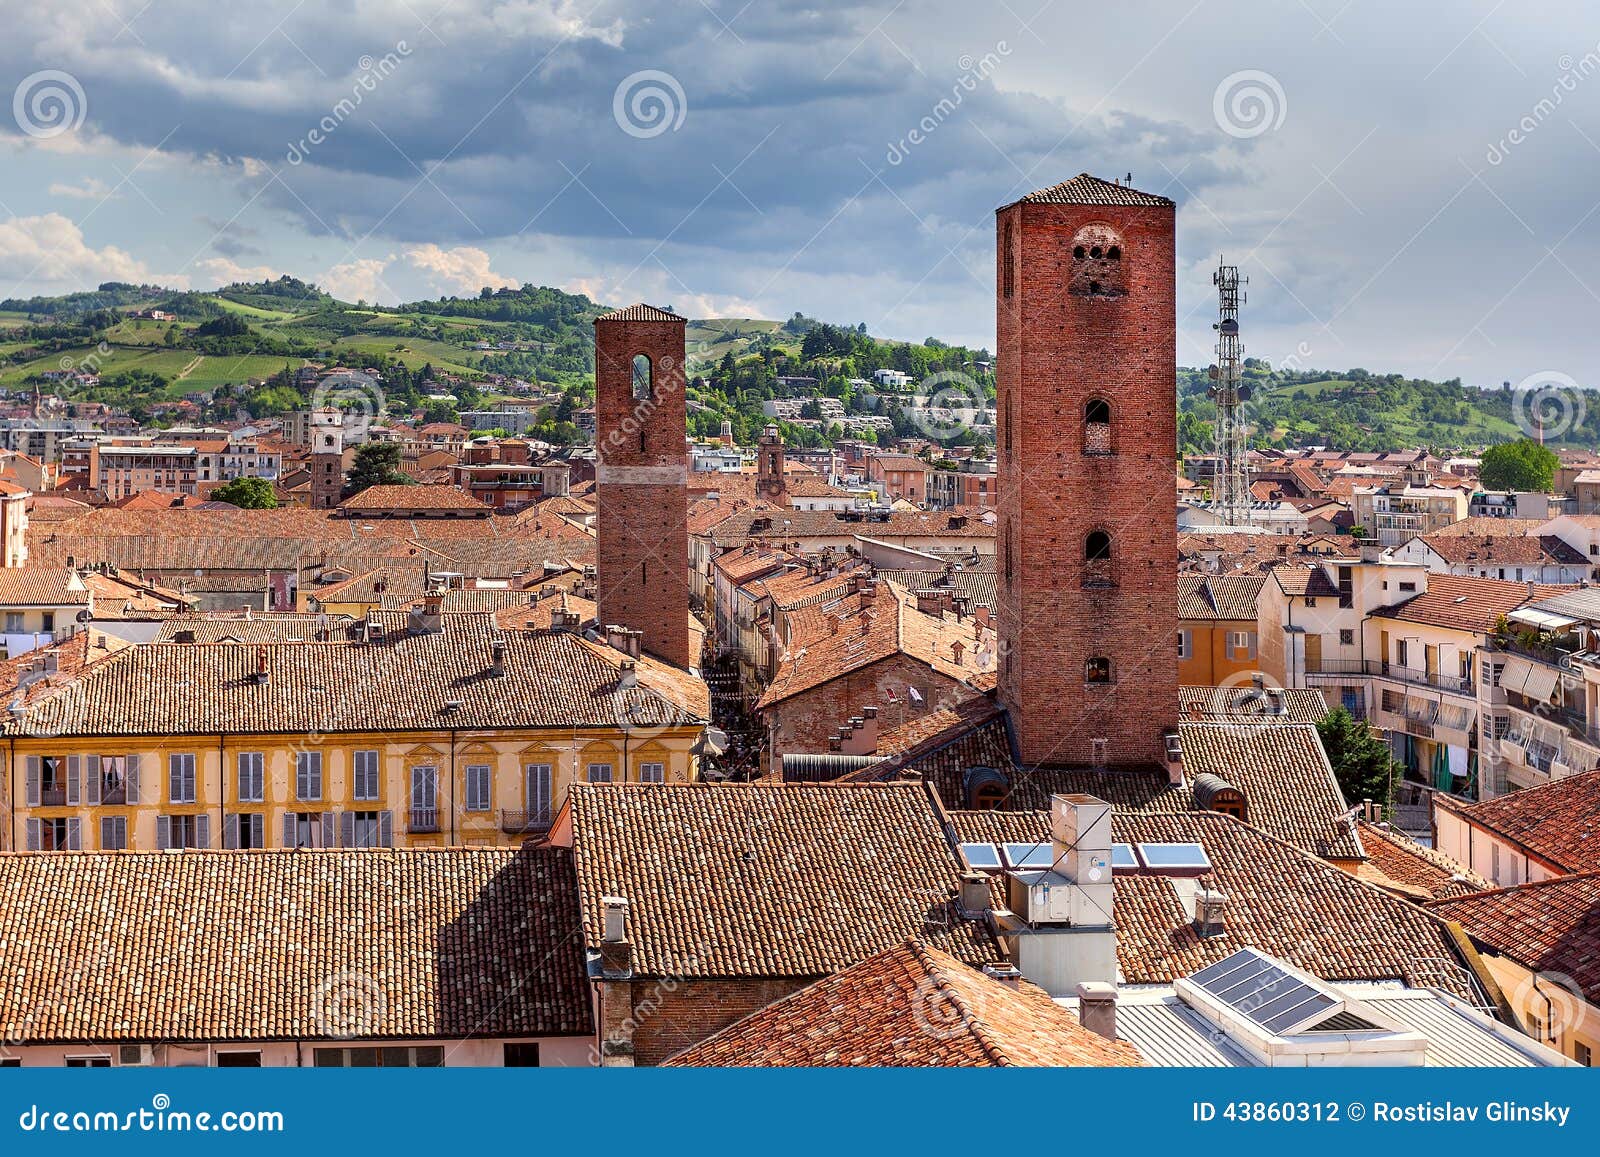 red roofs and medieval towers of alba, italy.